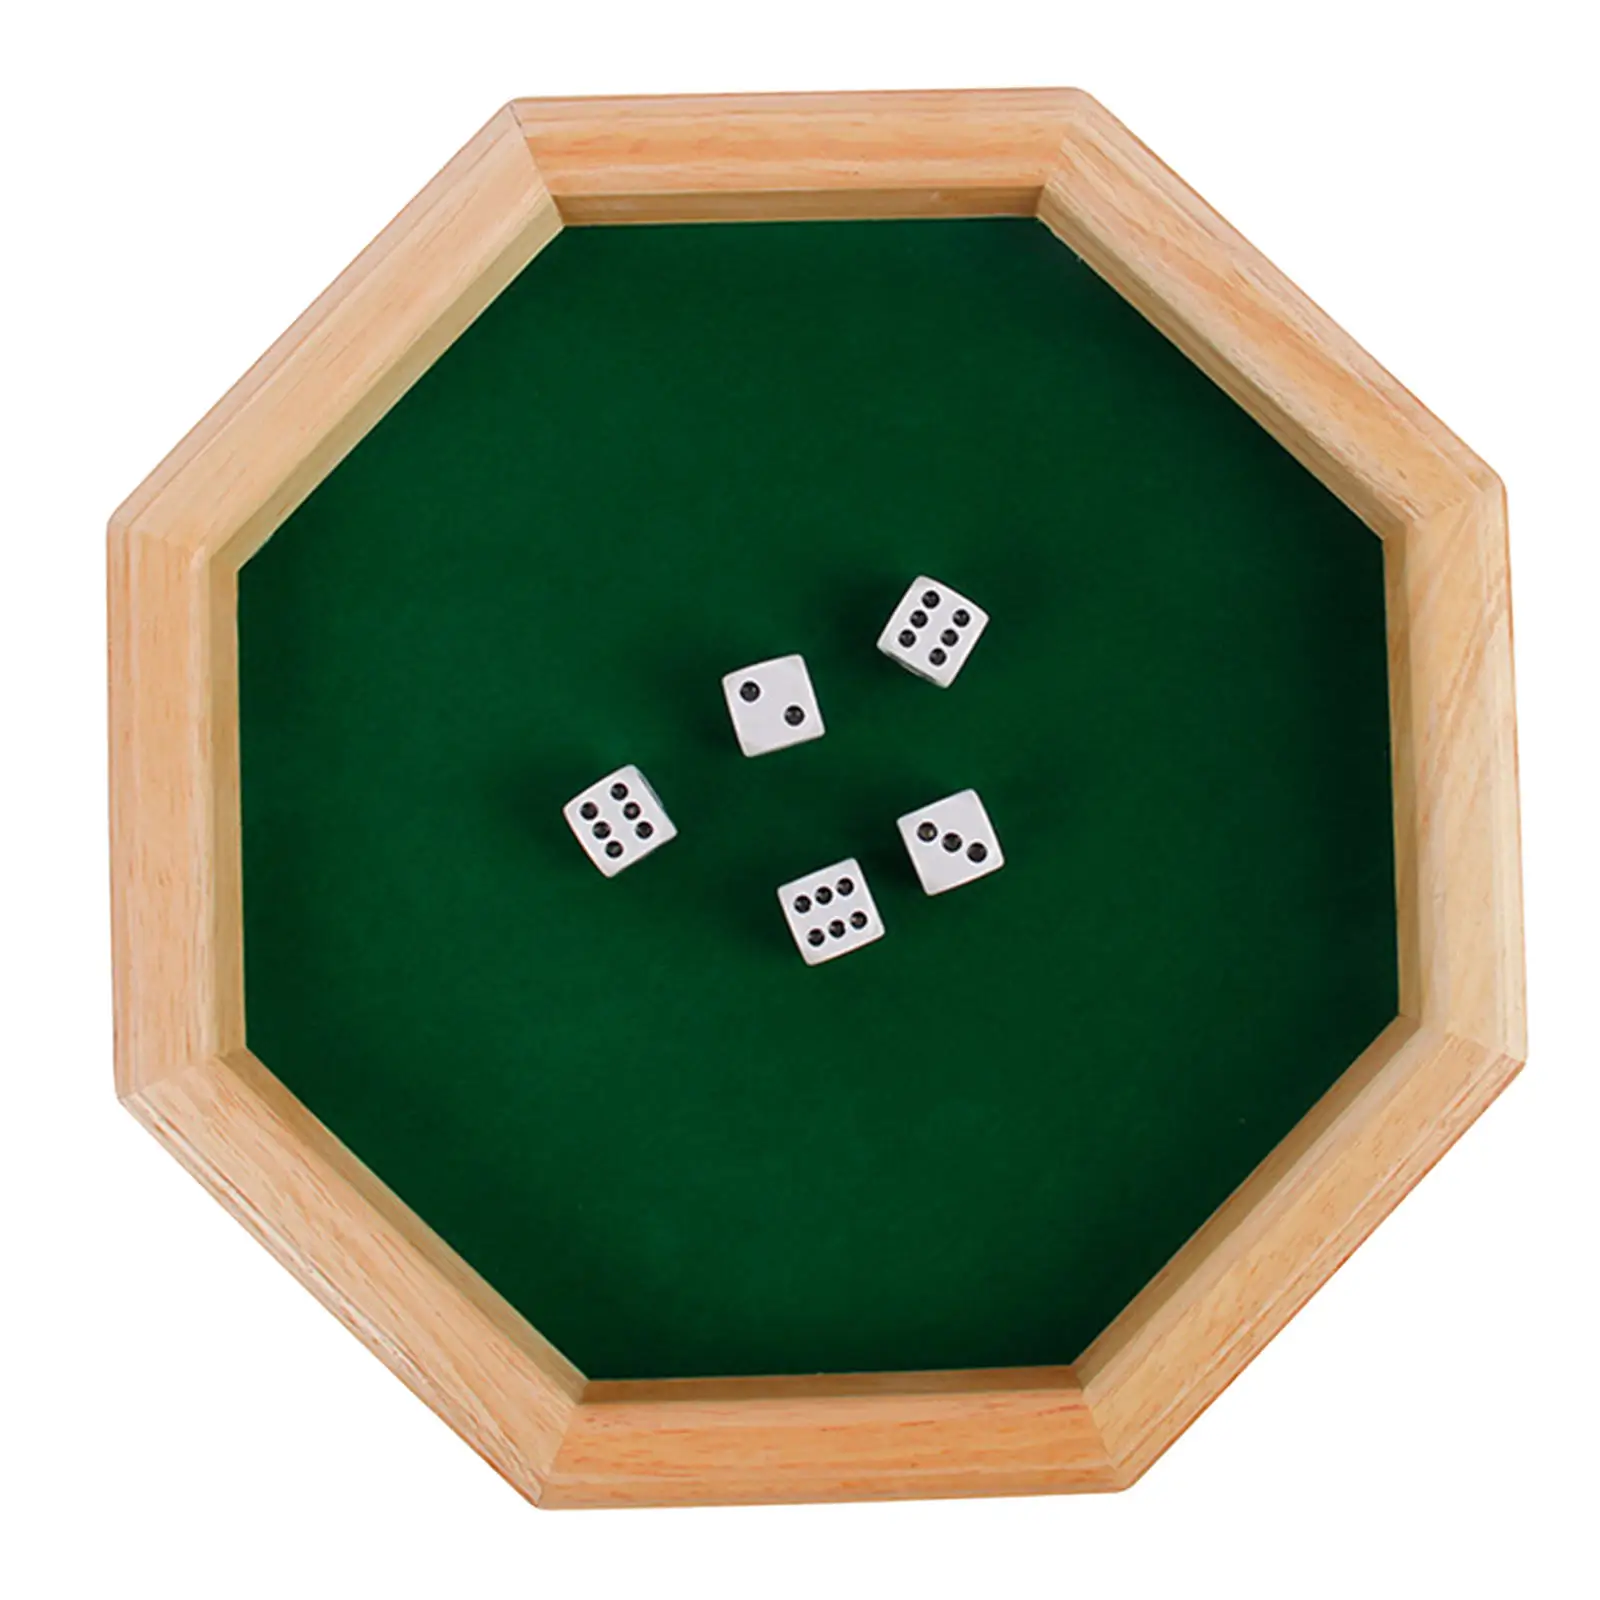 Heavy Duty 12 Inch Octagonal Wooden Dice Tray with Felt Lined Rolling Surface, Wooden Dice Rolling Tray for Family Game Night